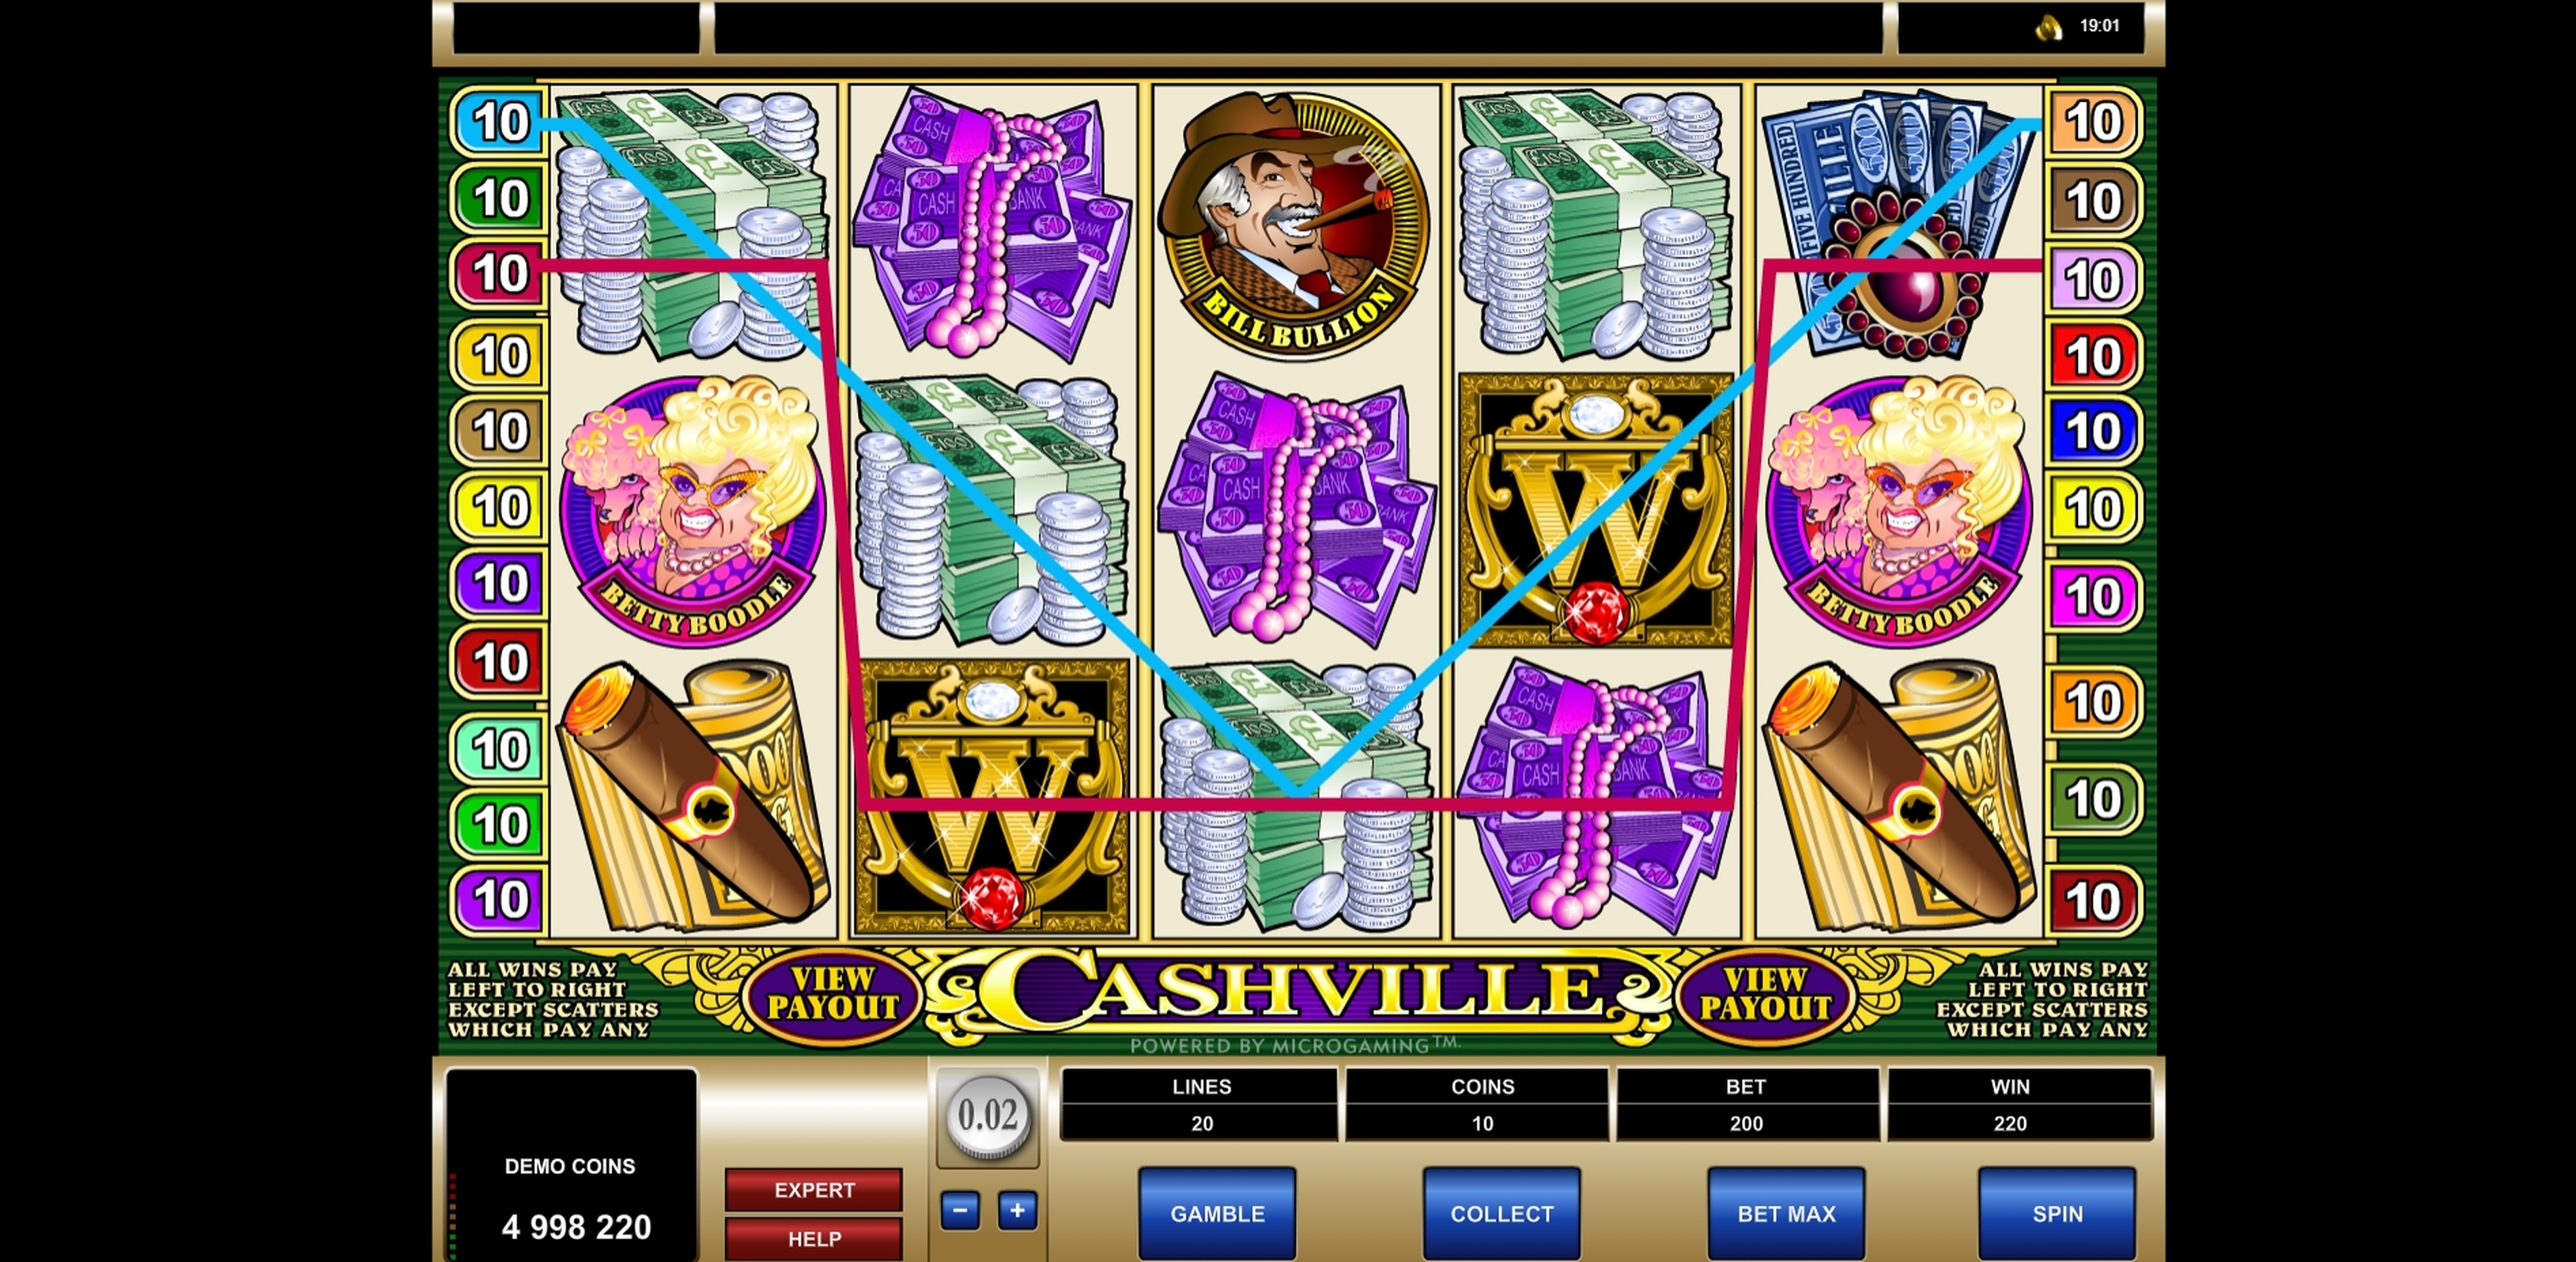 Win Money in Cashville Free Slot Game by Microgaming